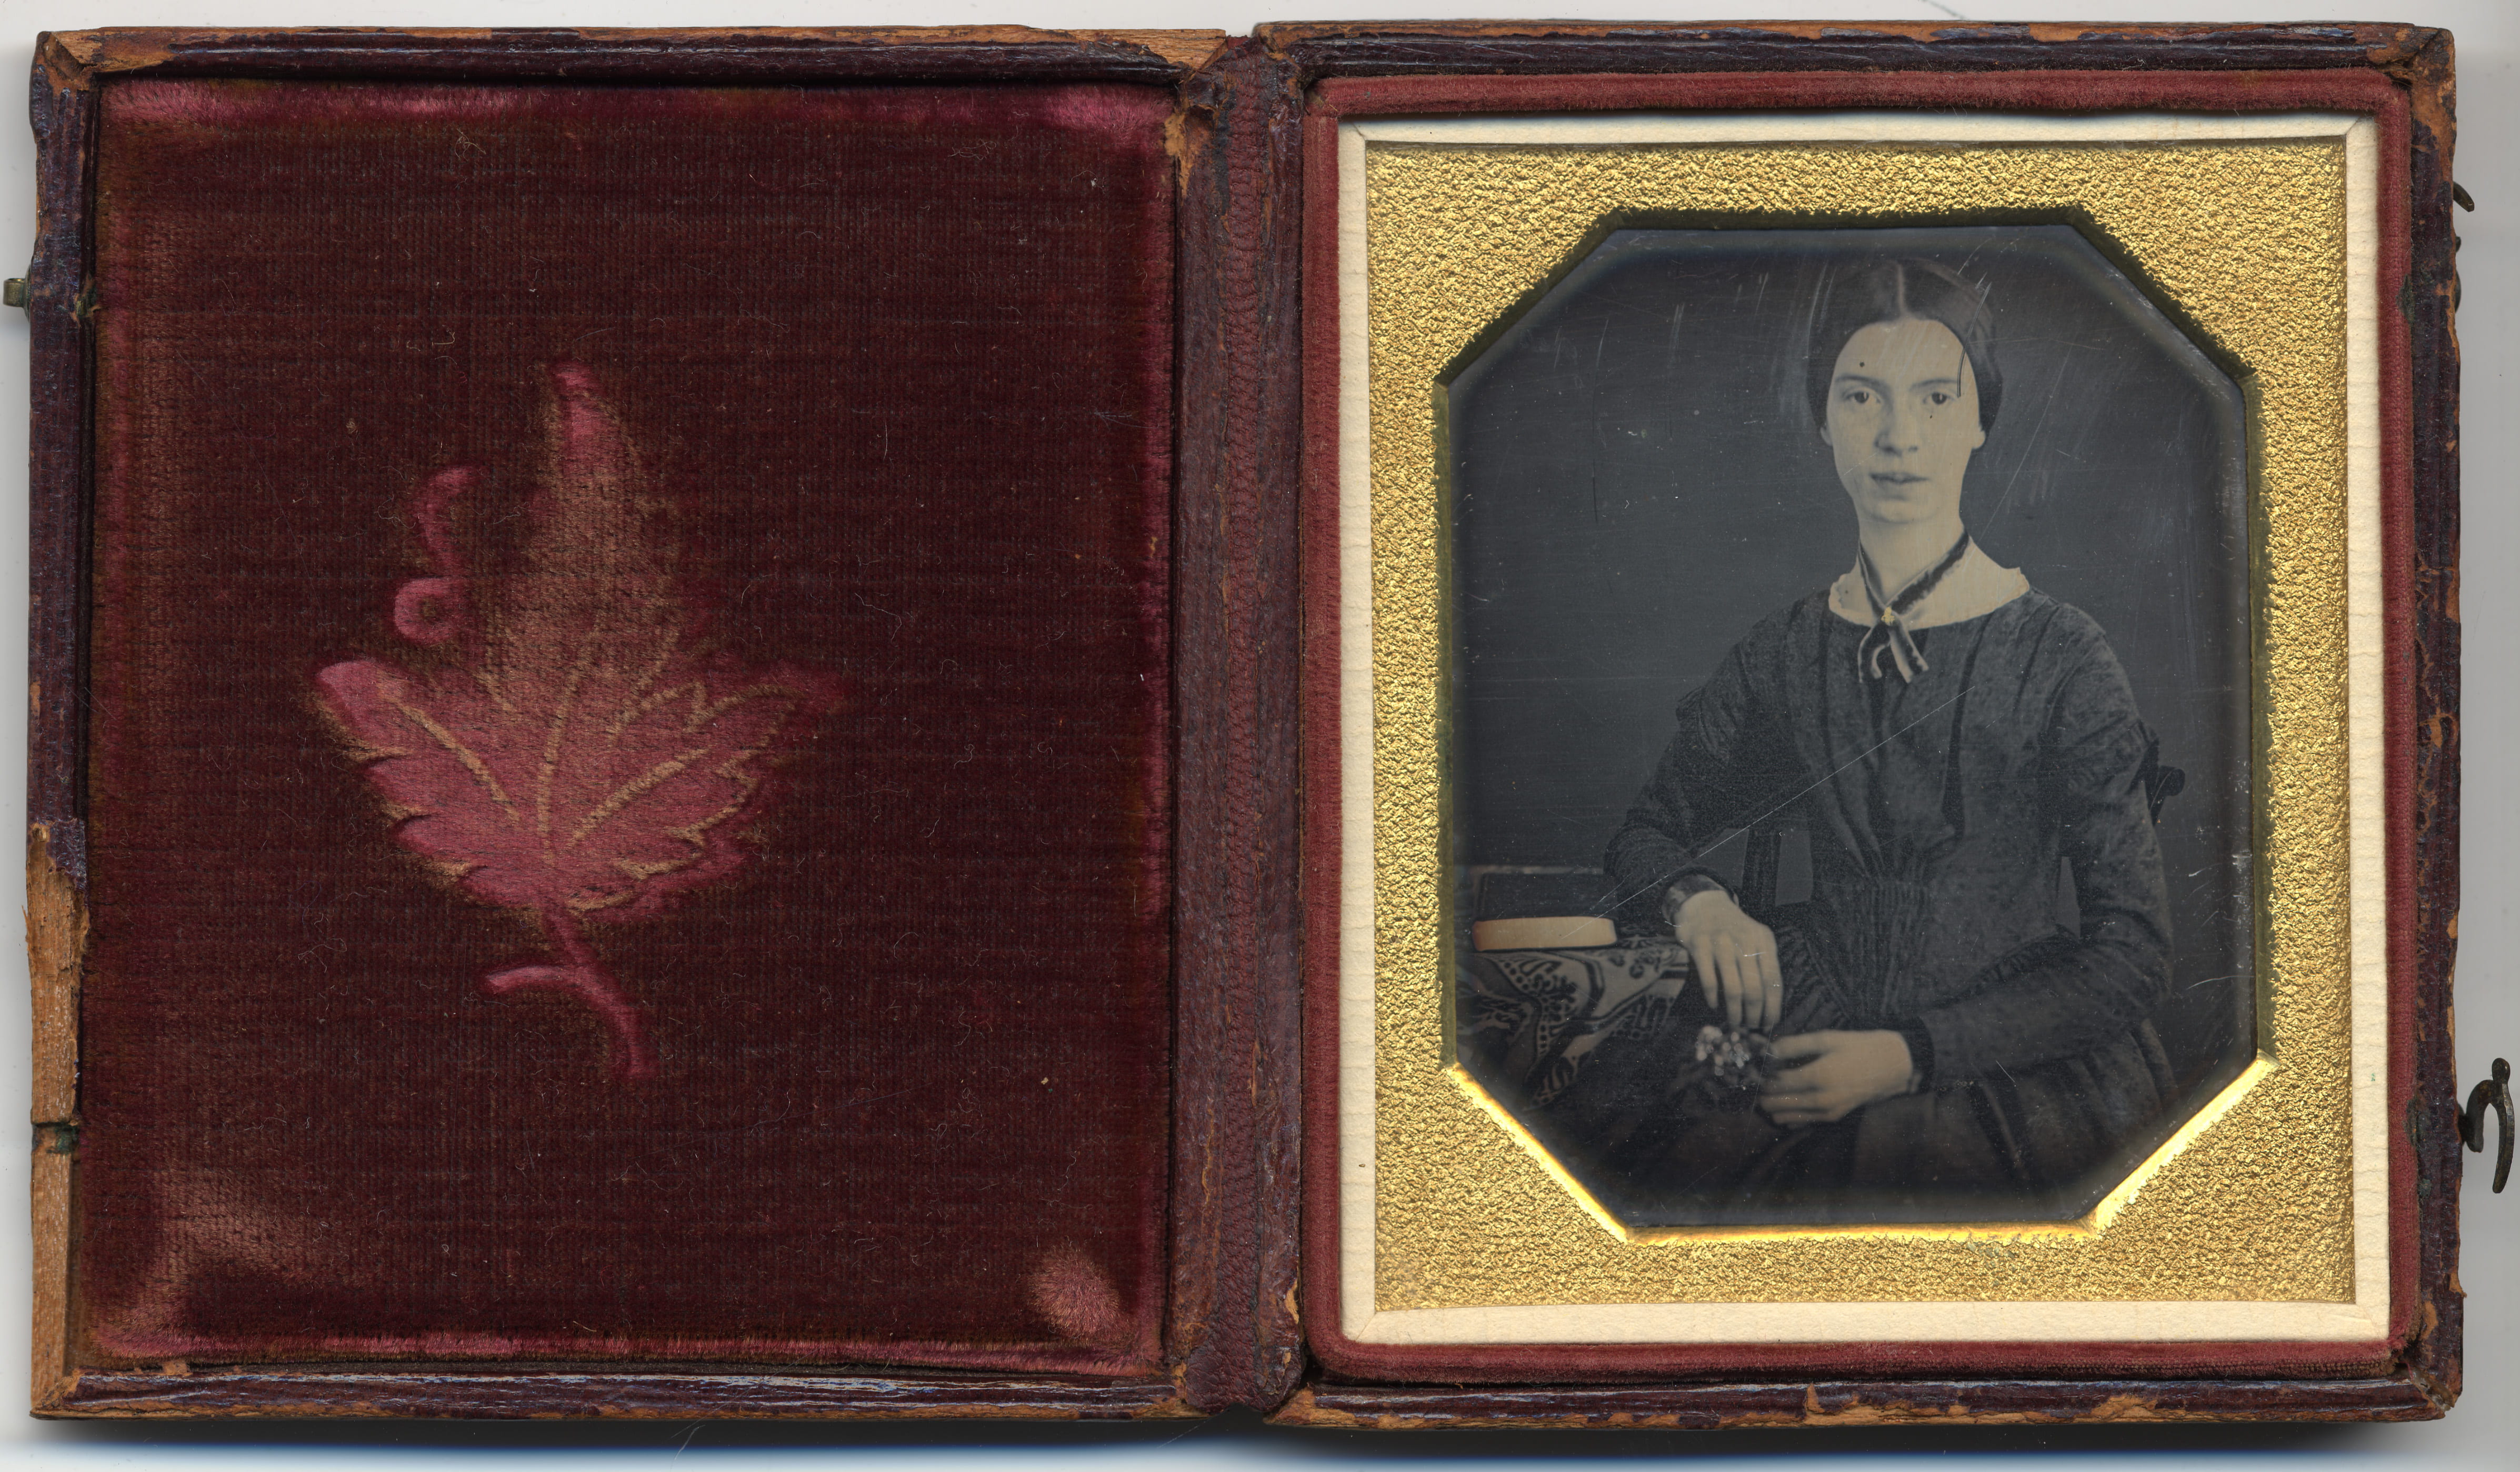 The daguerreotype sent to Millicent Todd Bingham in 1945, now at Amherst College